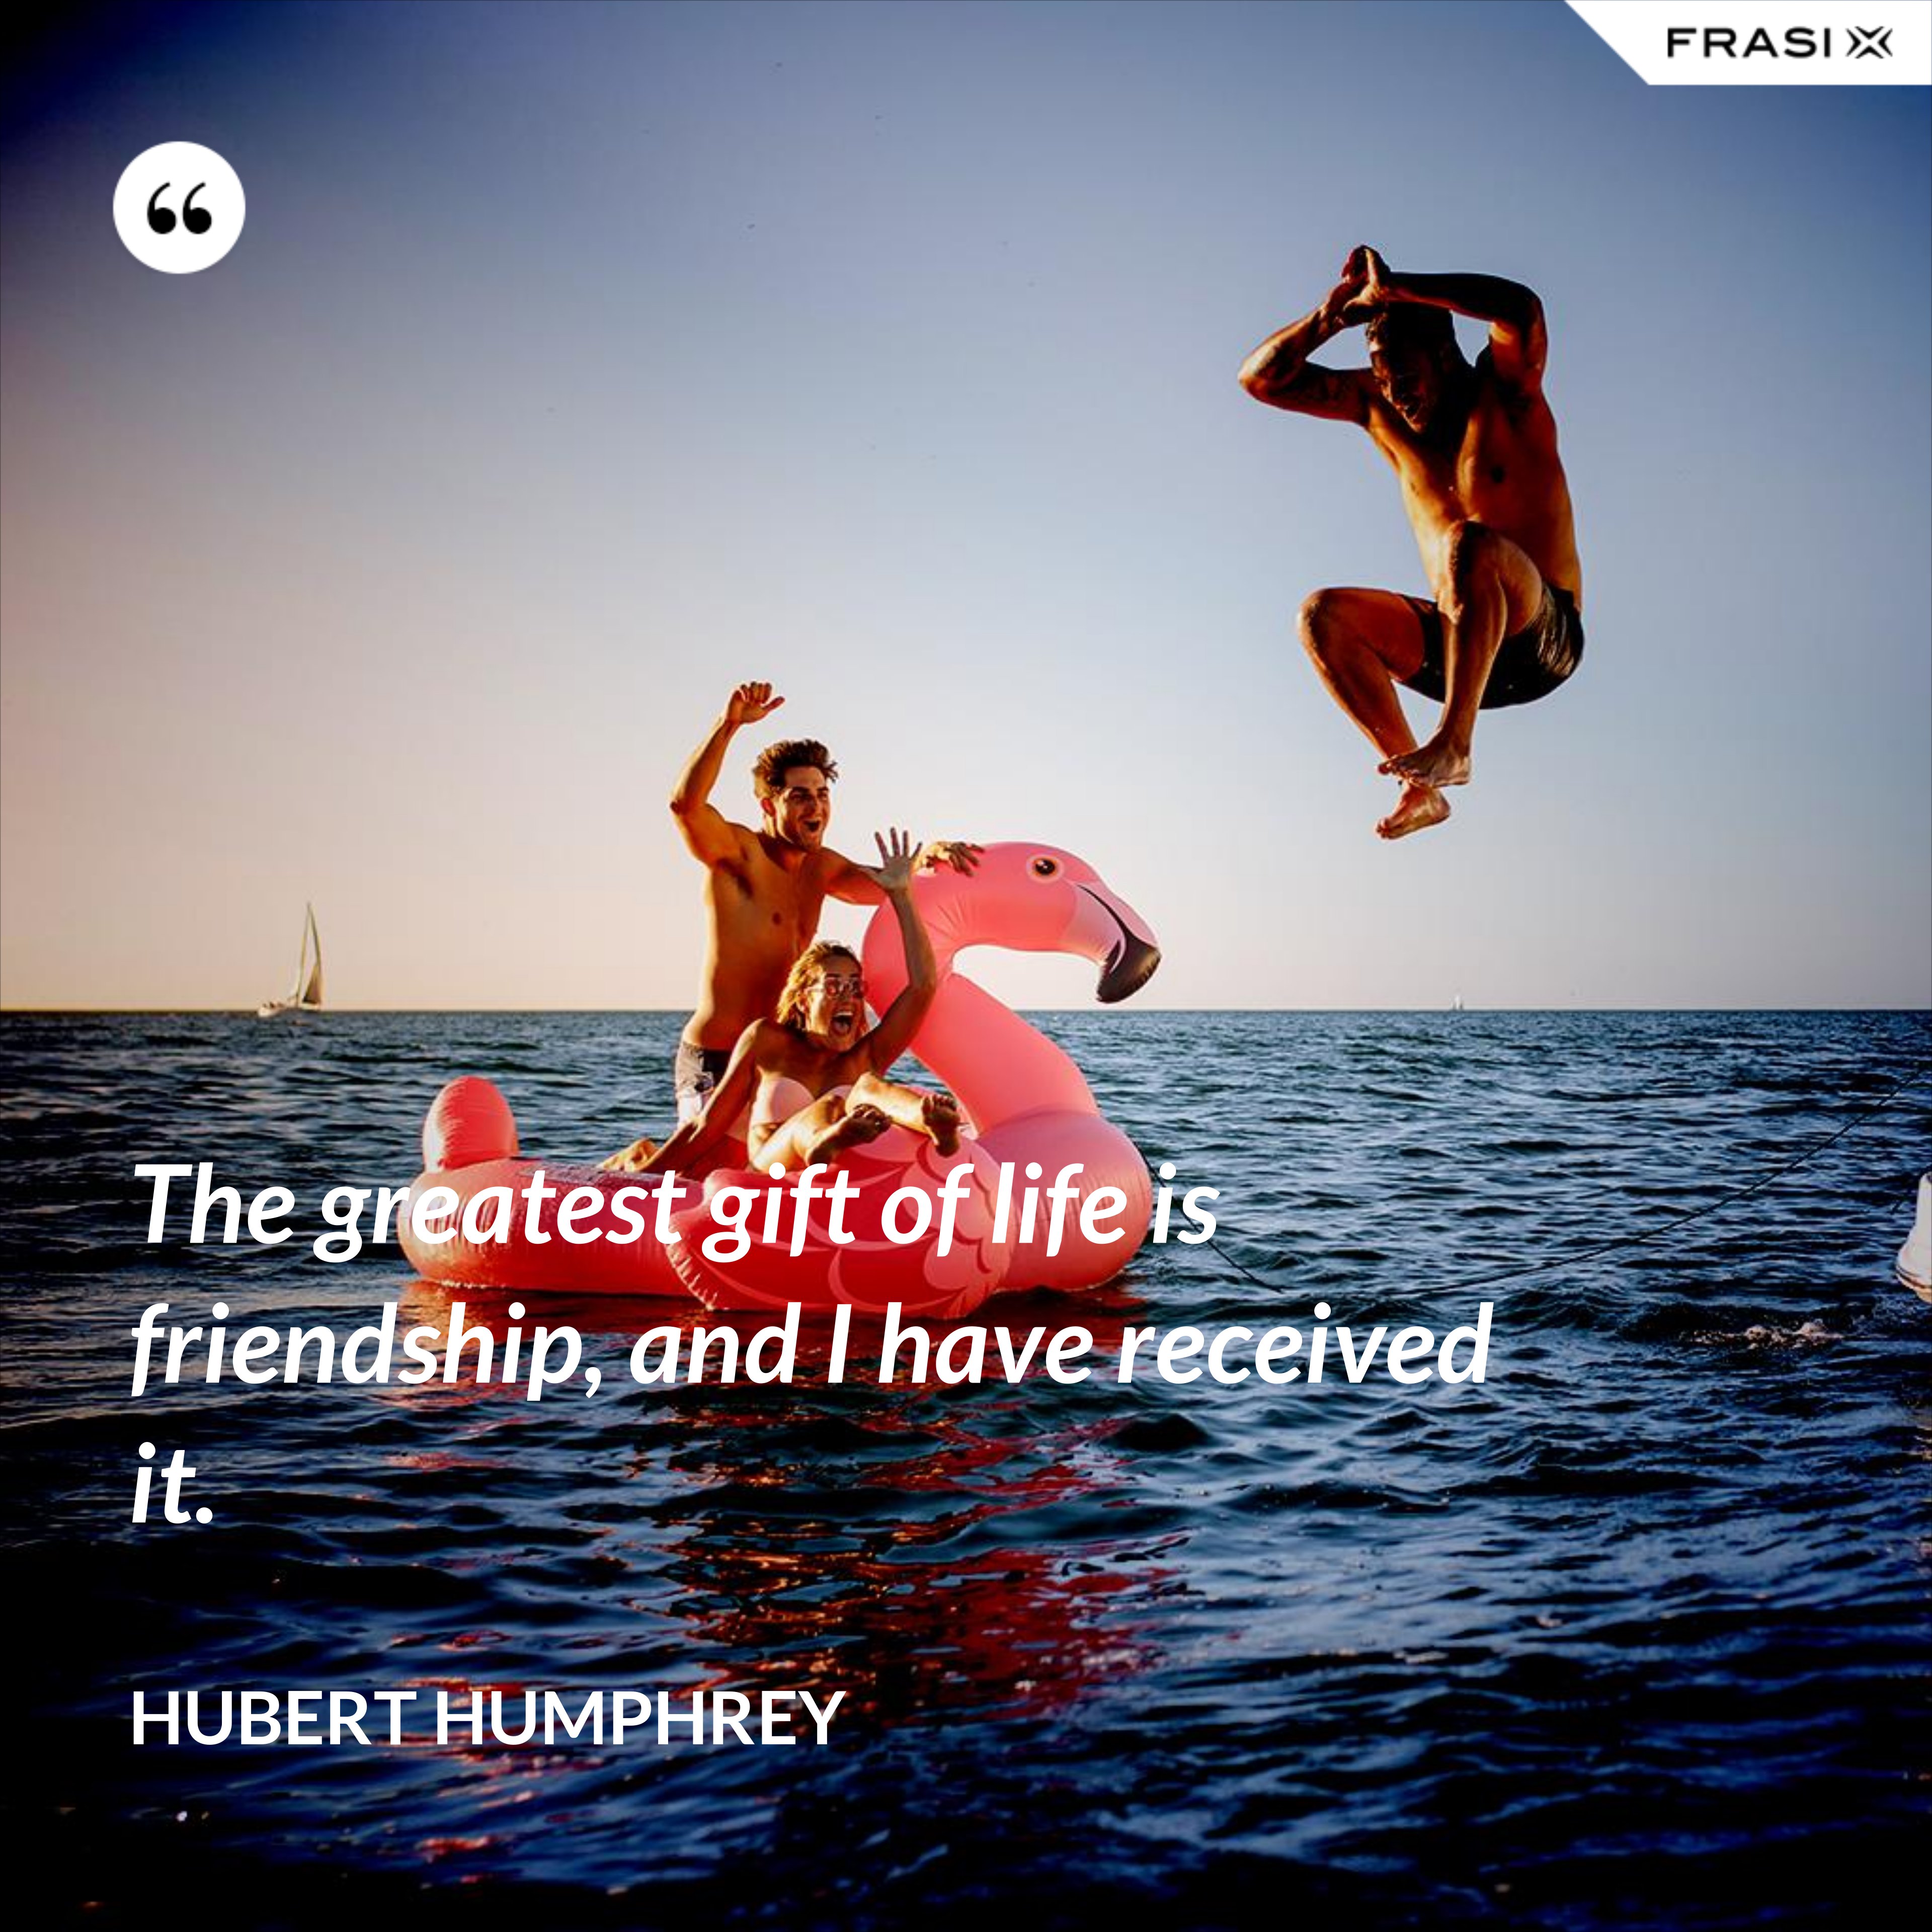 The greatest gift of life is friendship, and I have received it. - Hubert Humphrey